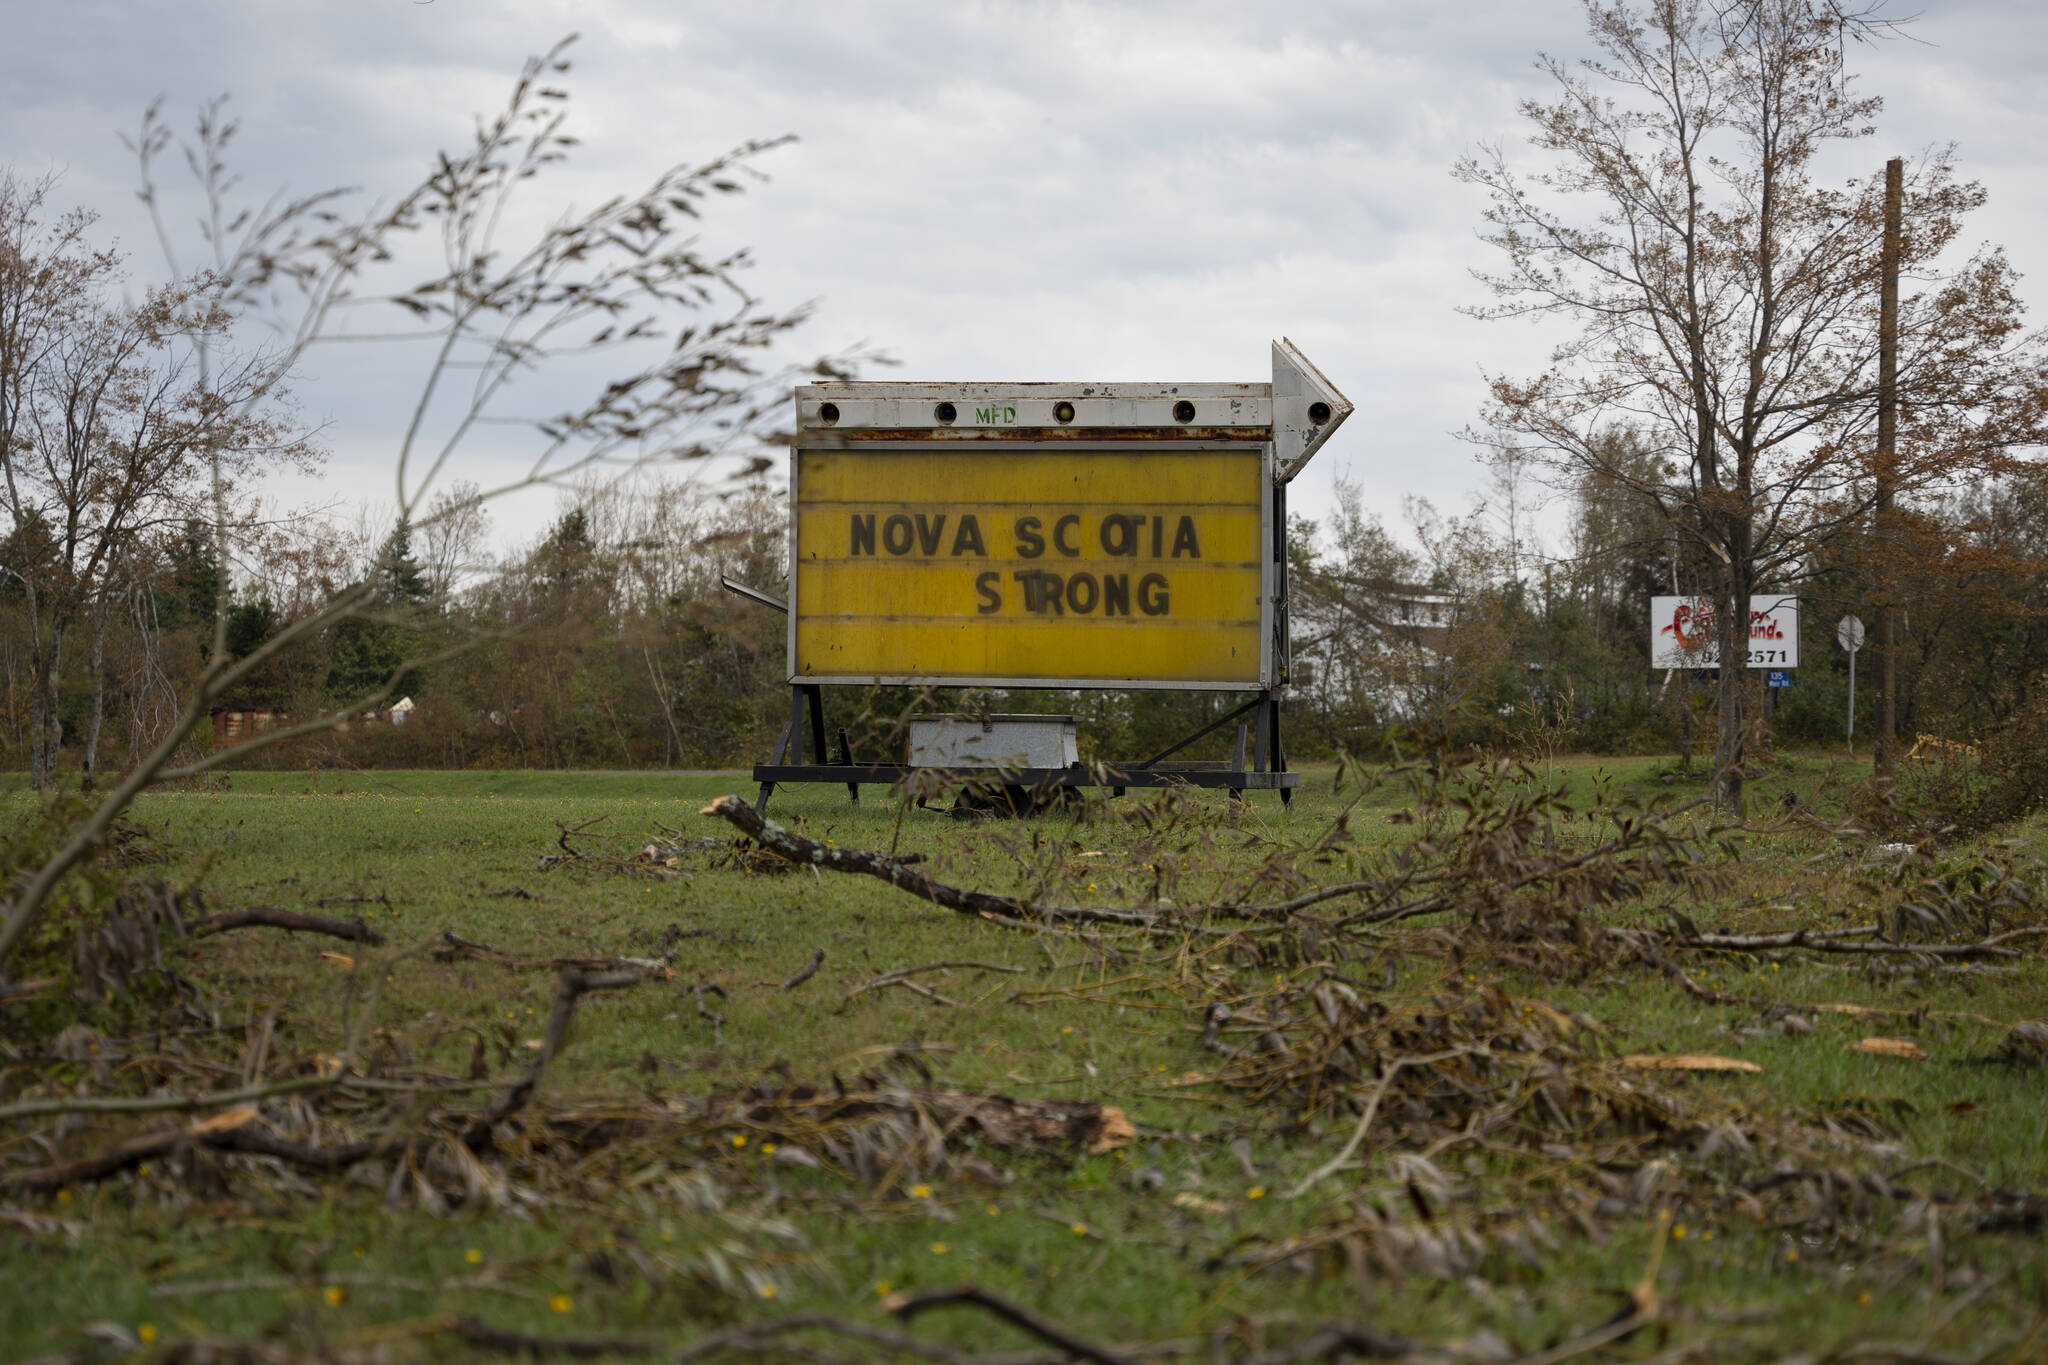 A sign depicting a hopeful message is seen amidst downed tree limbs near Lower Barneys River in Pictou County, N.S. on Wednesday, September 28, 2022 following significant damage brought by post tropical storm Fiona. THE CANADIAN PRESS/Darren Calabrese